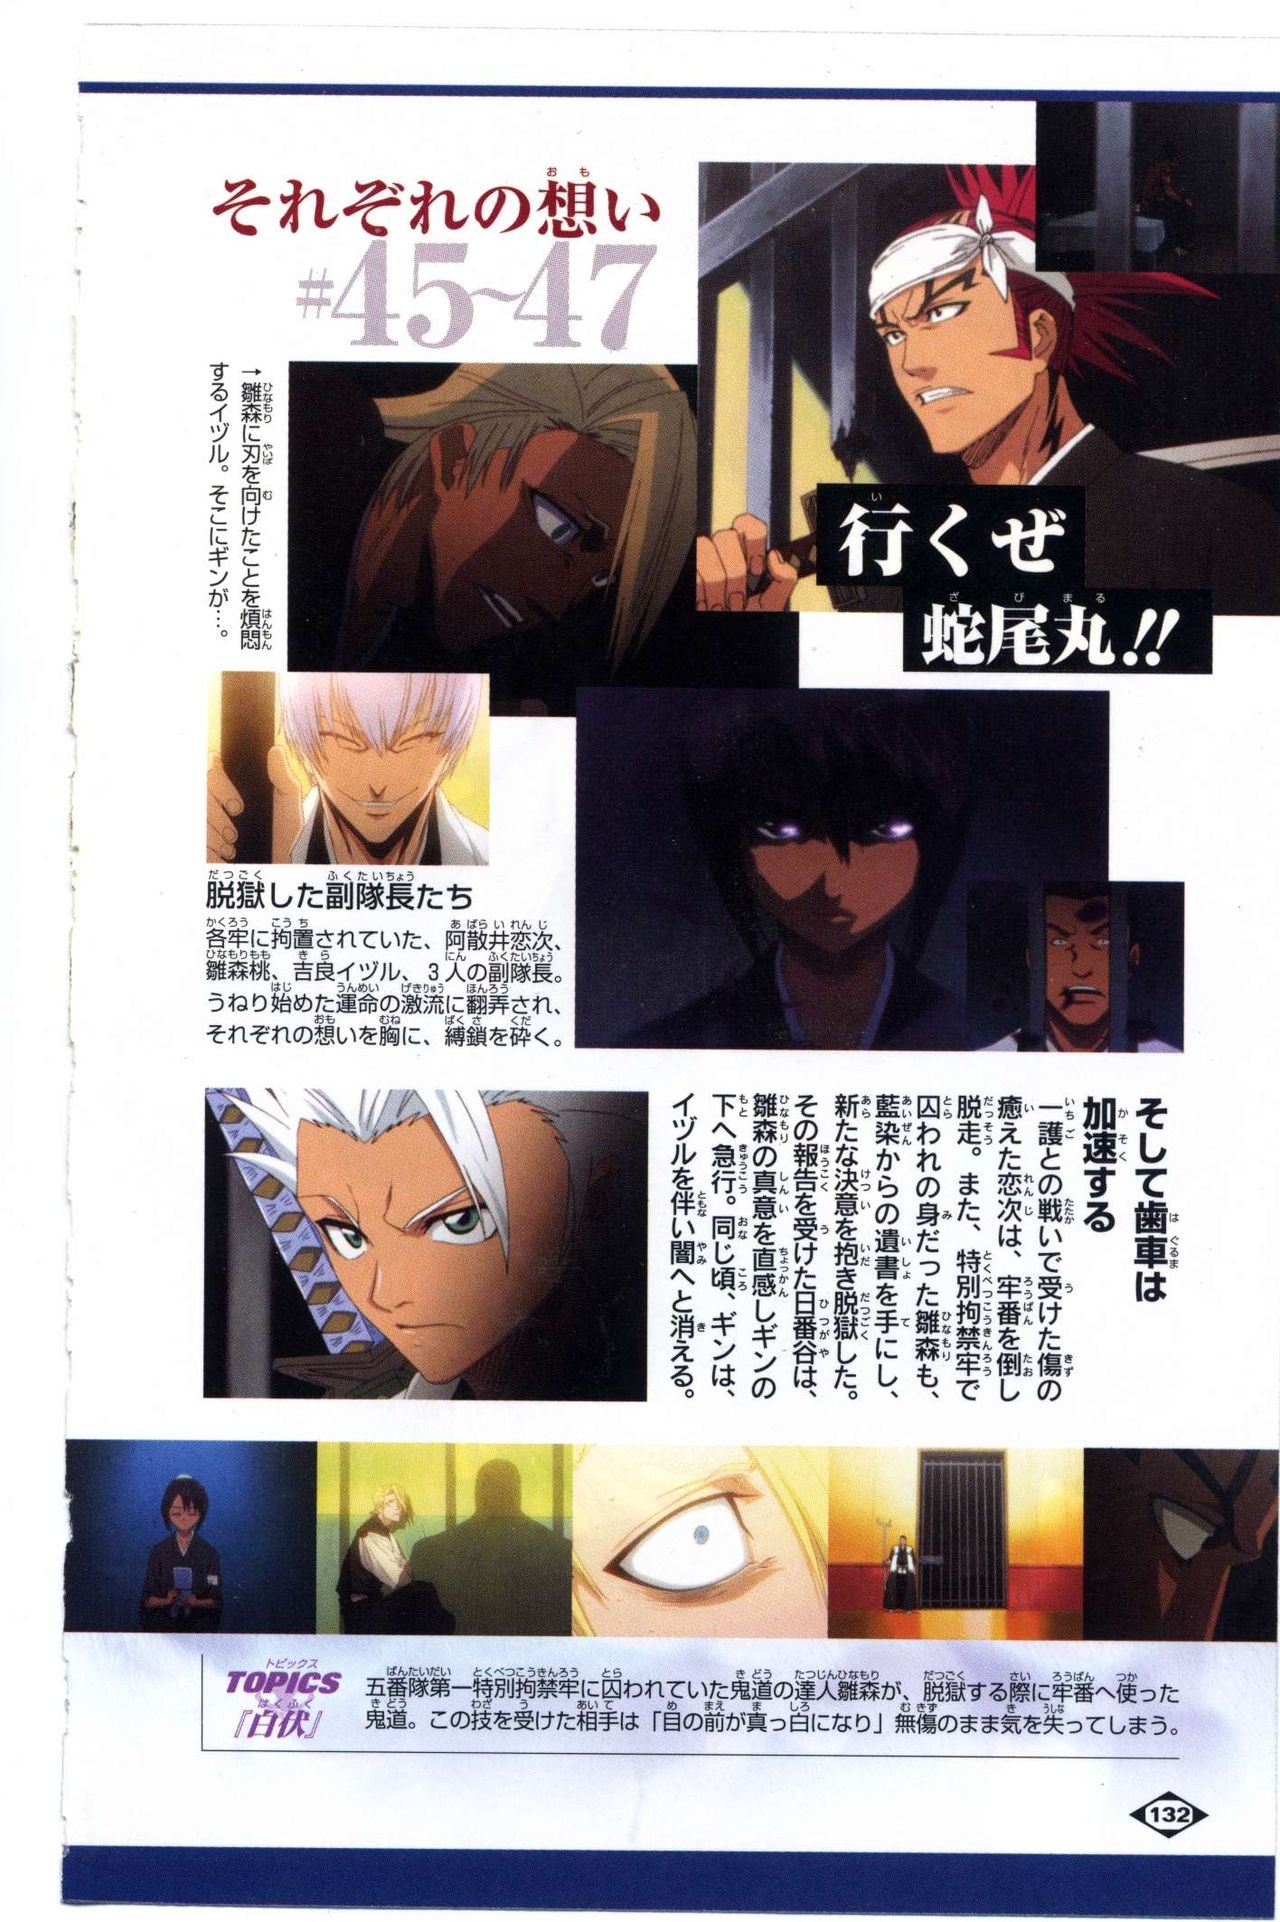 Bleach: Official Animation Book VIBEs 132